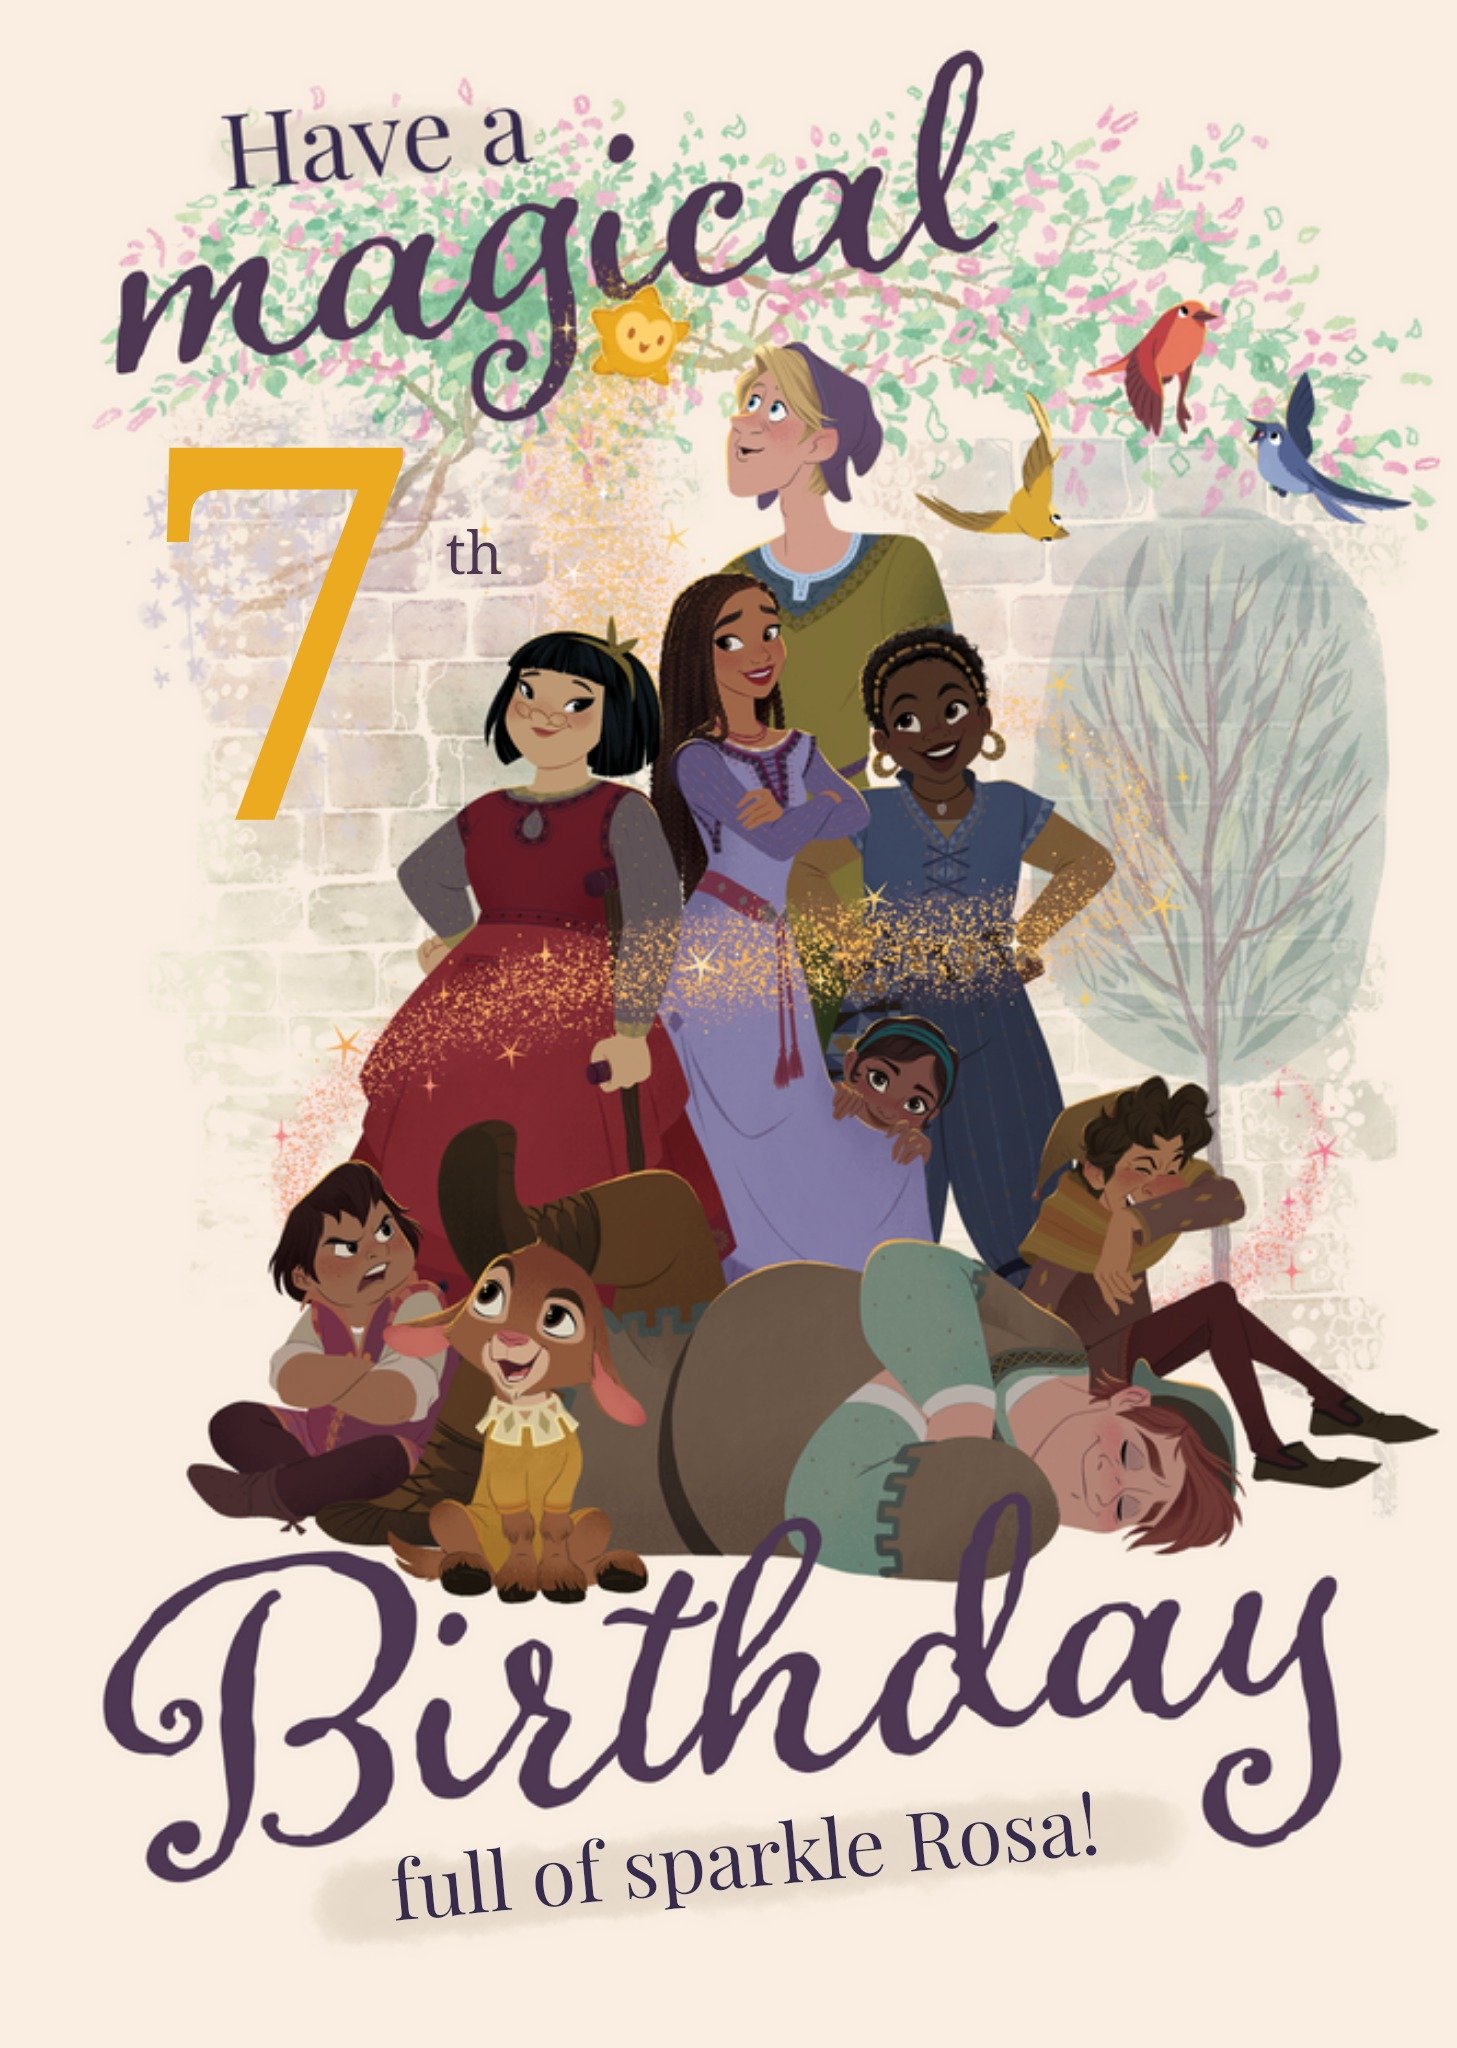 Disney Wish Have A Magical Birthday Card, Large